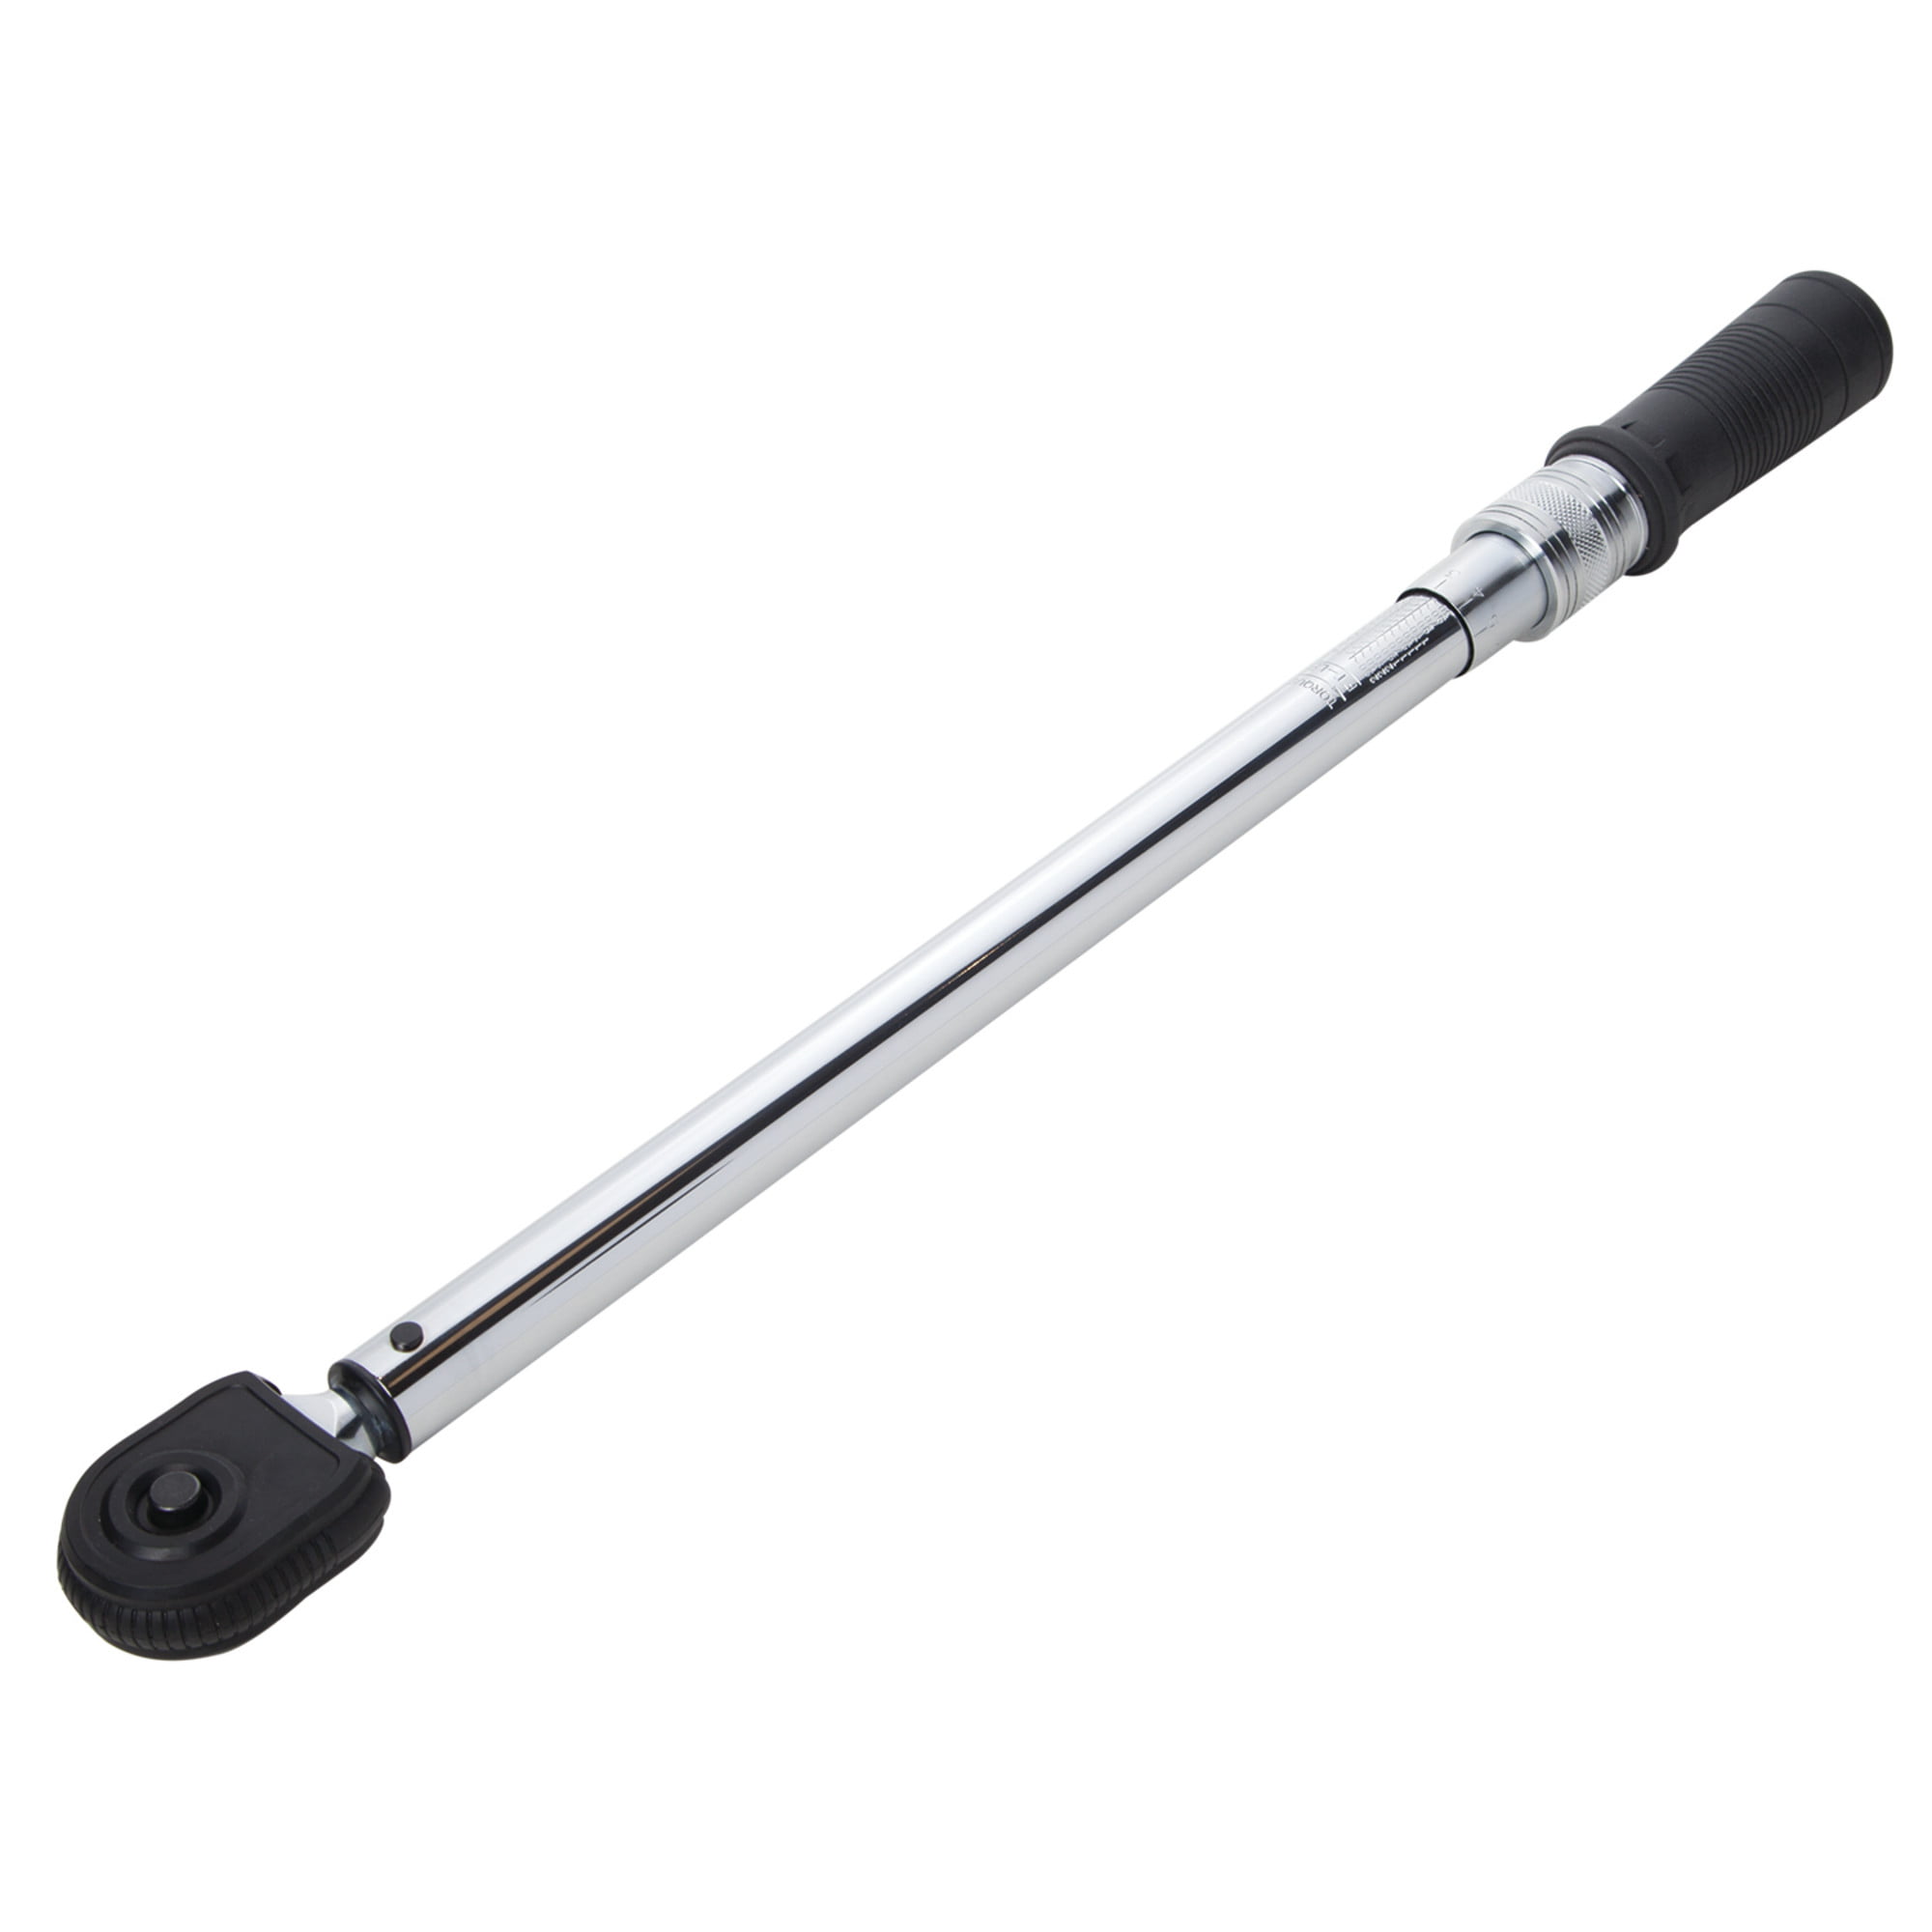 Steelman Pro 1/2 in Drive Adjustable Torque Wrench 30 to 250 ft-lb 97034 